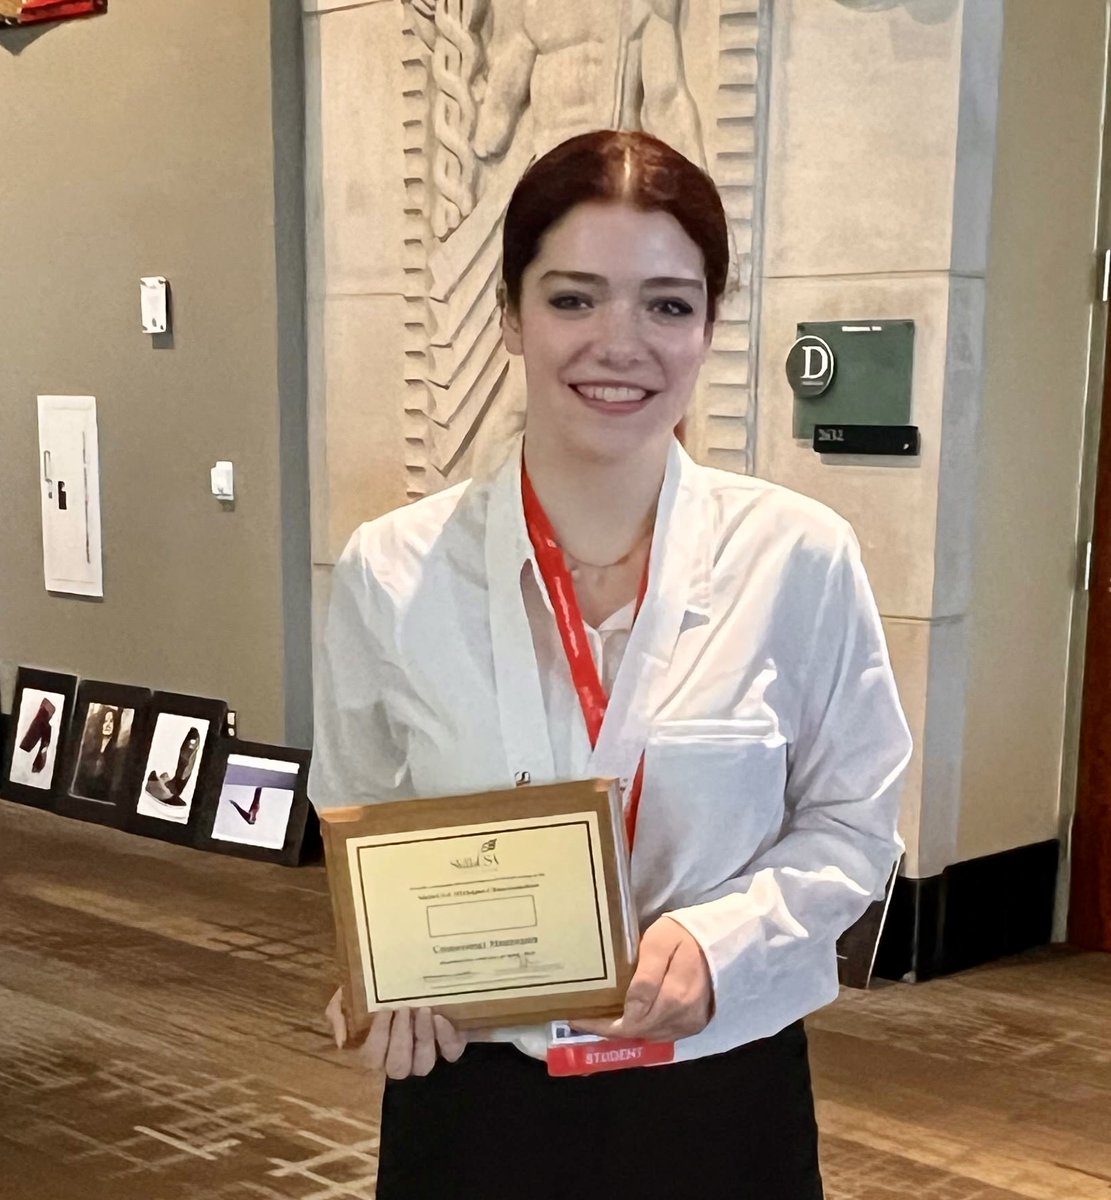 A few of our Cosmetology students recently had the opportunity to compete at the SkillsUSA State Championships. We are excited to announce that @A2CHS junior Zoey Cerniglia took 1st place in the Cosmetology Mannequin division. Congrats!